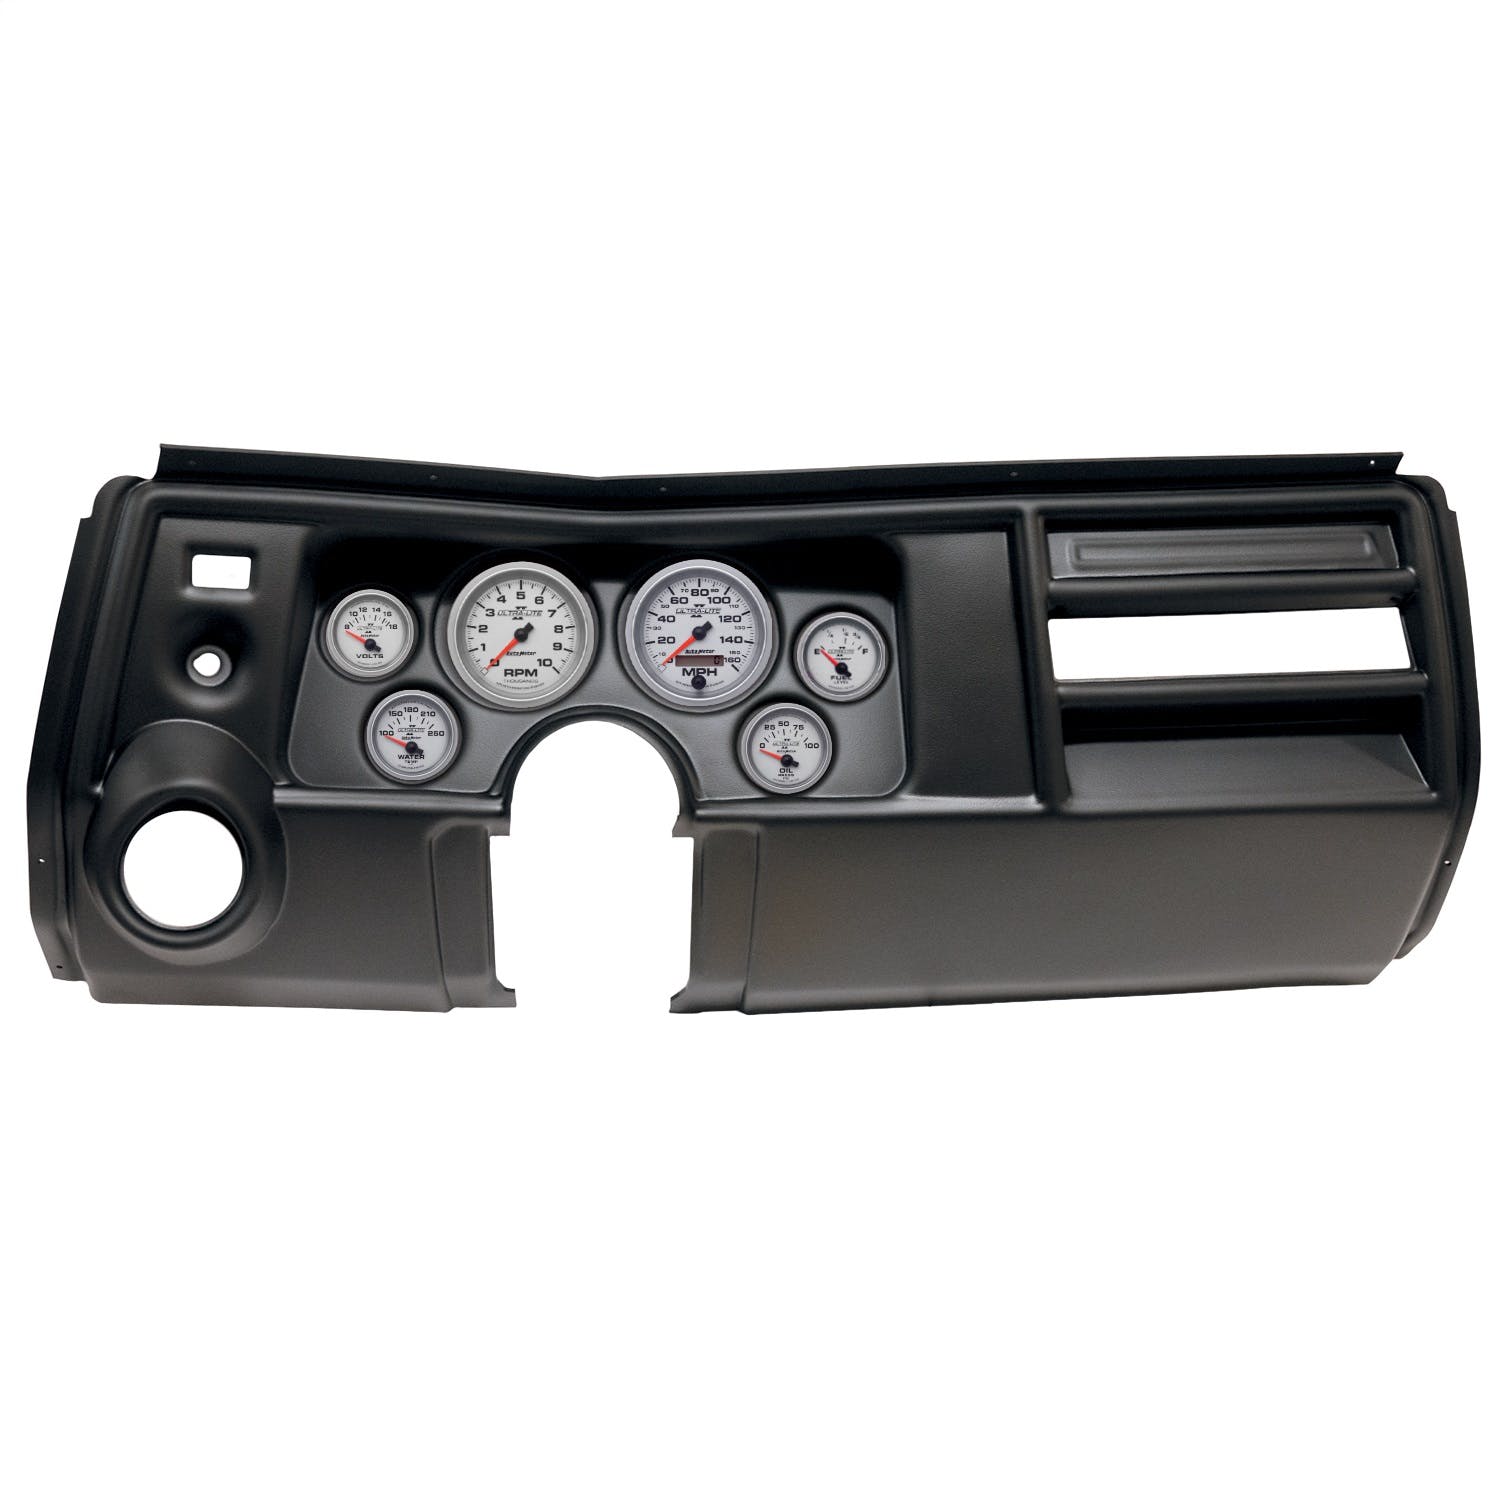 AutoMeter Products 2909-14 6 Gauge Direct-Fit Dash Kit, Chevy Chevelle Vent 69, Ultra-Lite II